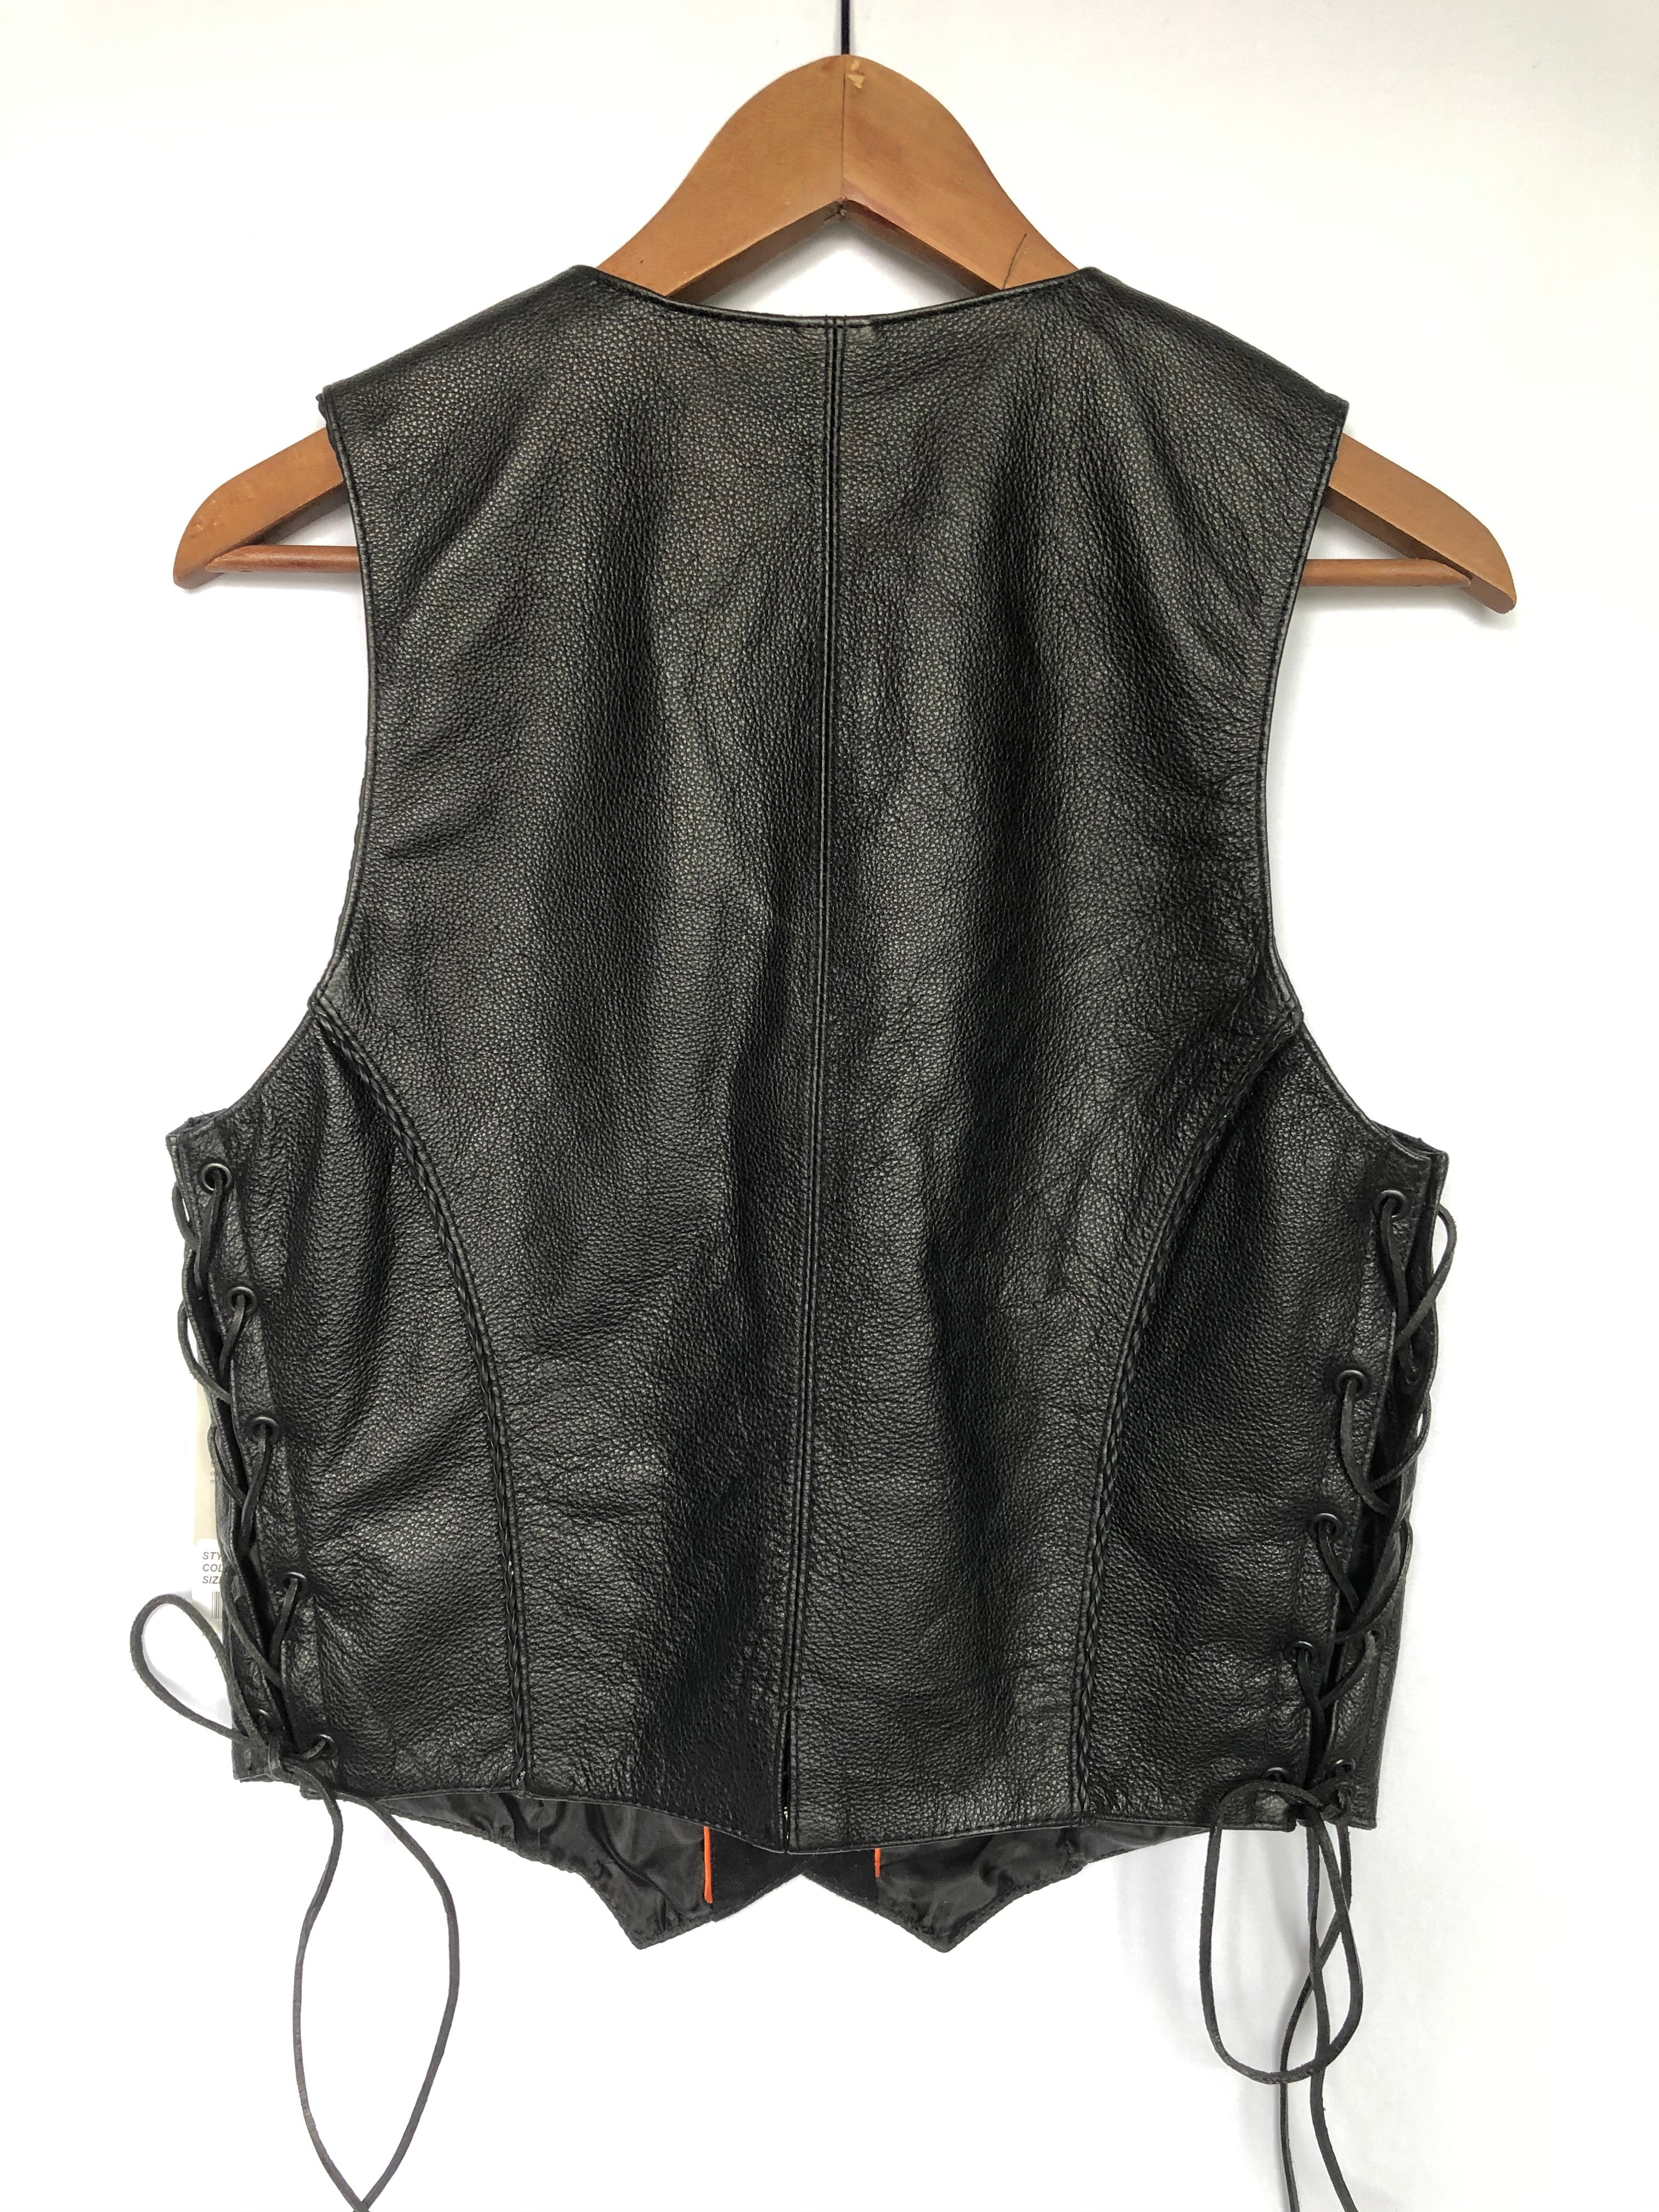 TBV Women's Leather Western Braided Vest